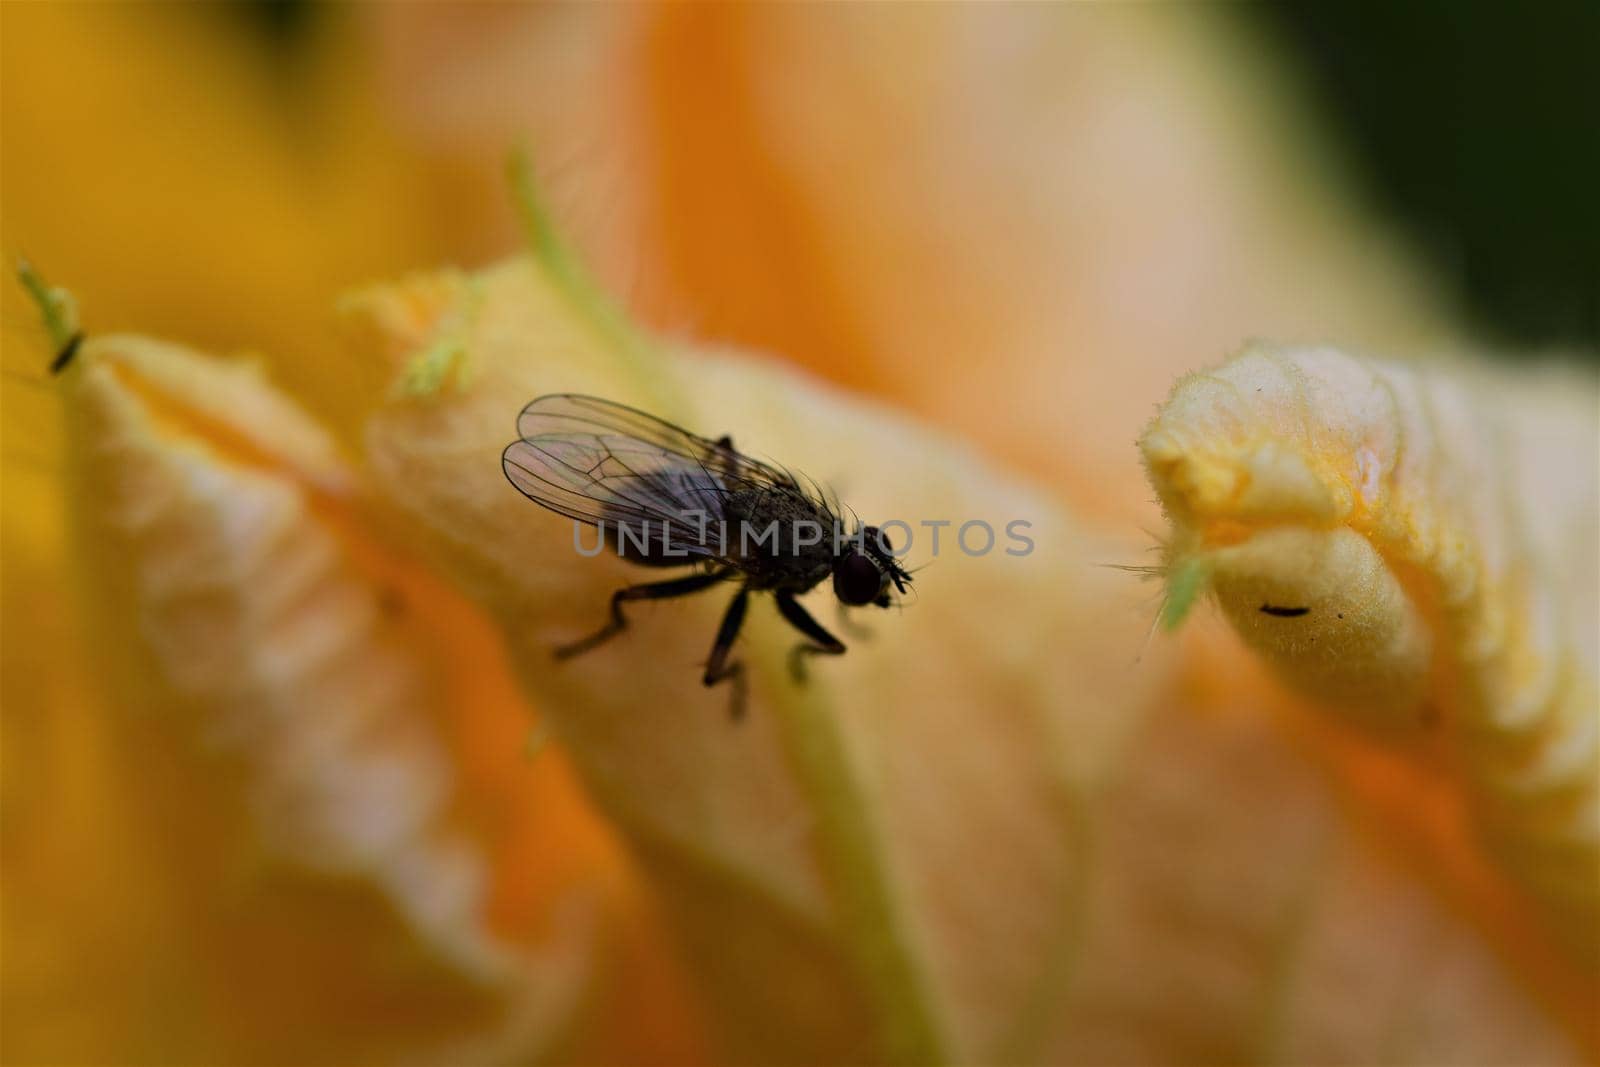 Fly on a yellow pumkin blossom as a close up